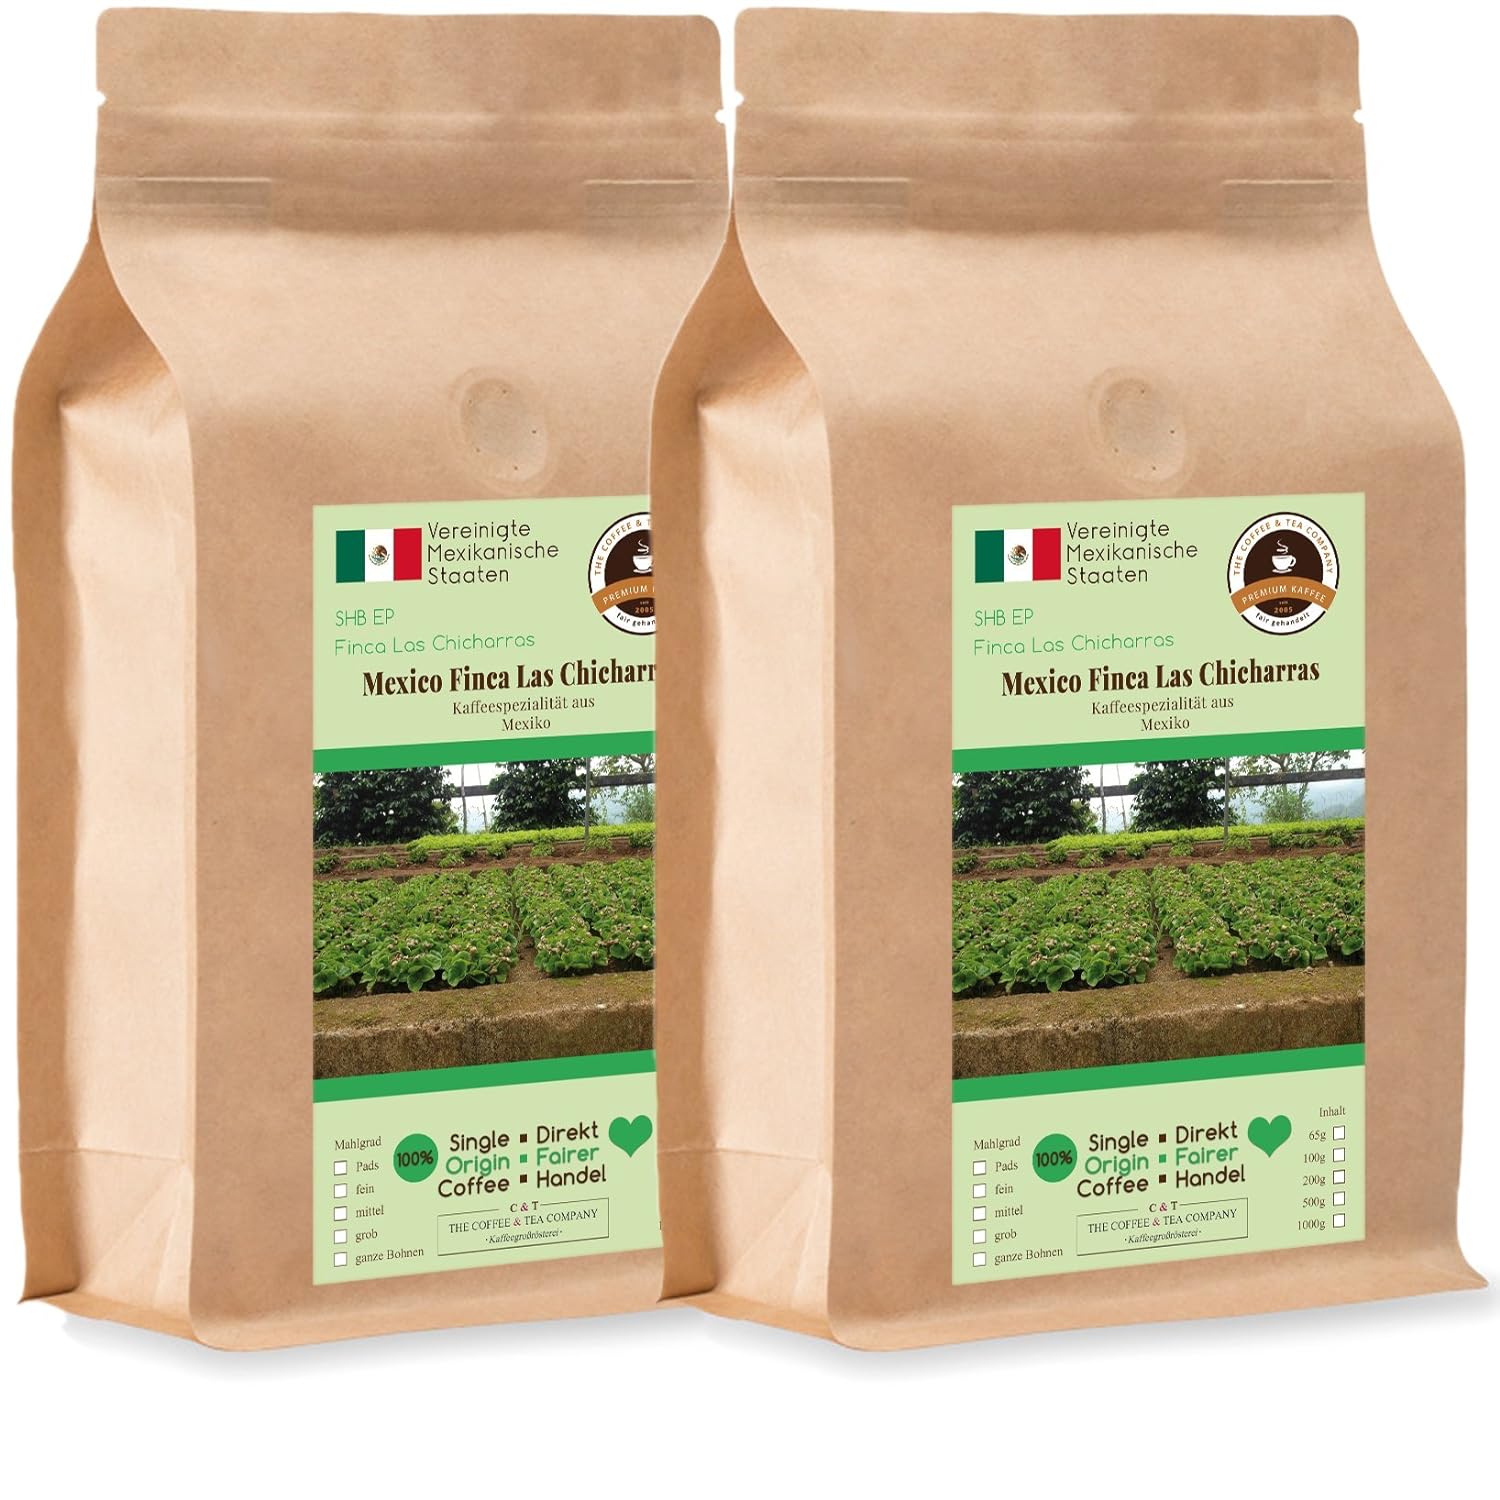 Coffee Globetrotter - Coffee with Heart - Mexico Finca Las Chicharras - 2 x 1000 g Whole Bean - for Fully Automatic Coffee Grinder - Roasted Coffee Fair Trade | Refill Pack Economy Pack